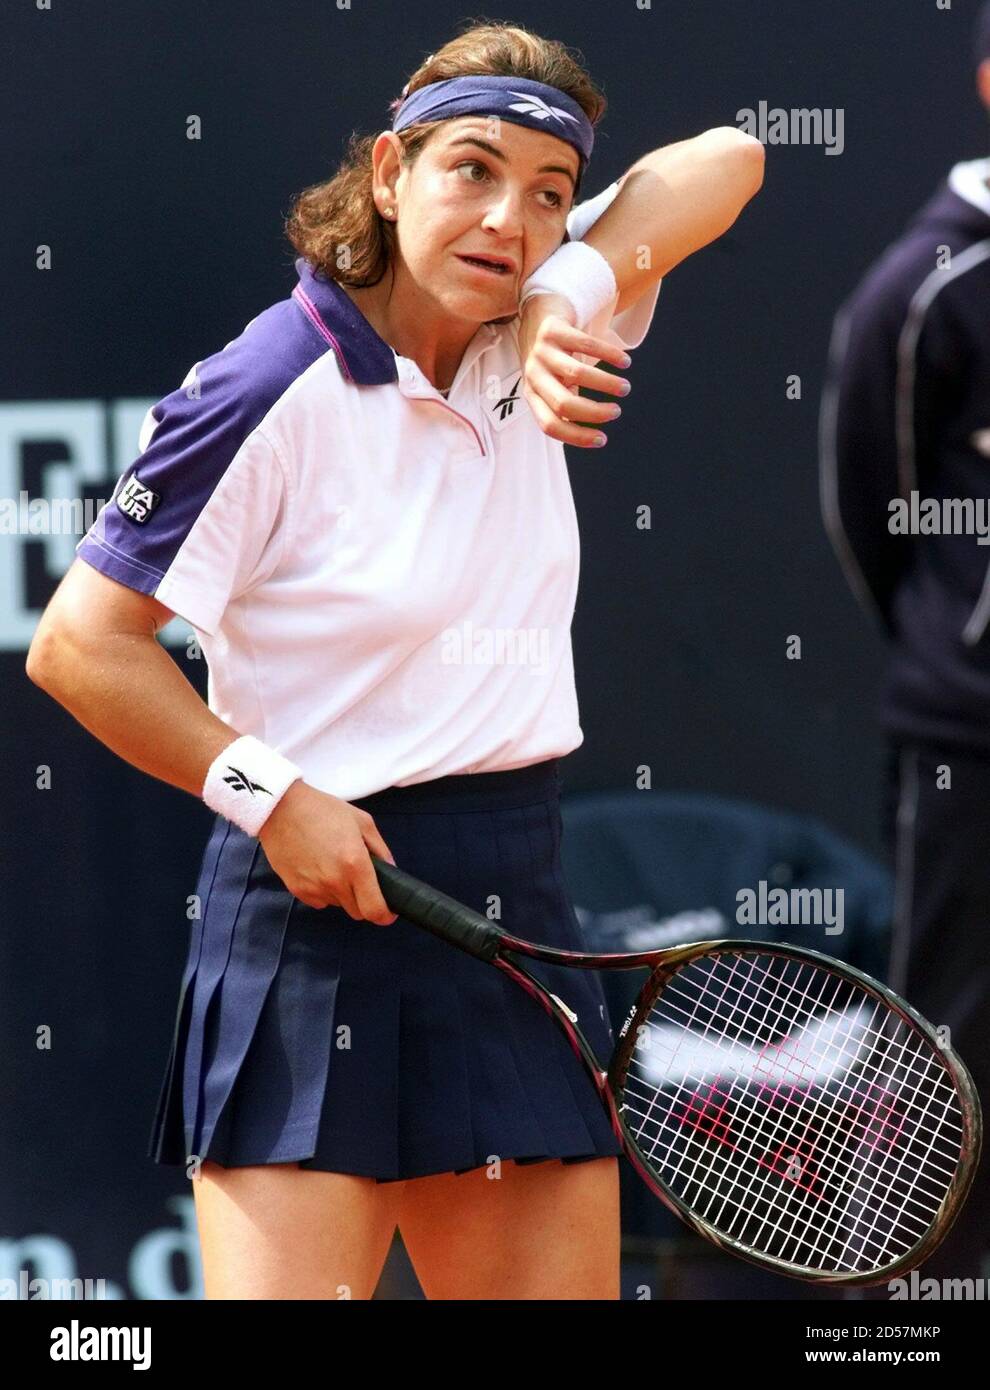 SPANISH TENNIS PLAYER SANCHEZ VICARIO WIPES HER FACE DURING HER MATCH  AGAINST MARTINEZ OF SPAIN IN BERLIN. Spanish tennis player Arantxa Sanchez  Vicario wipes her face during her match against Conchita Martinez